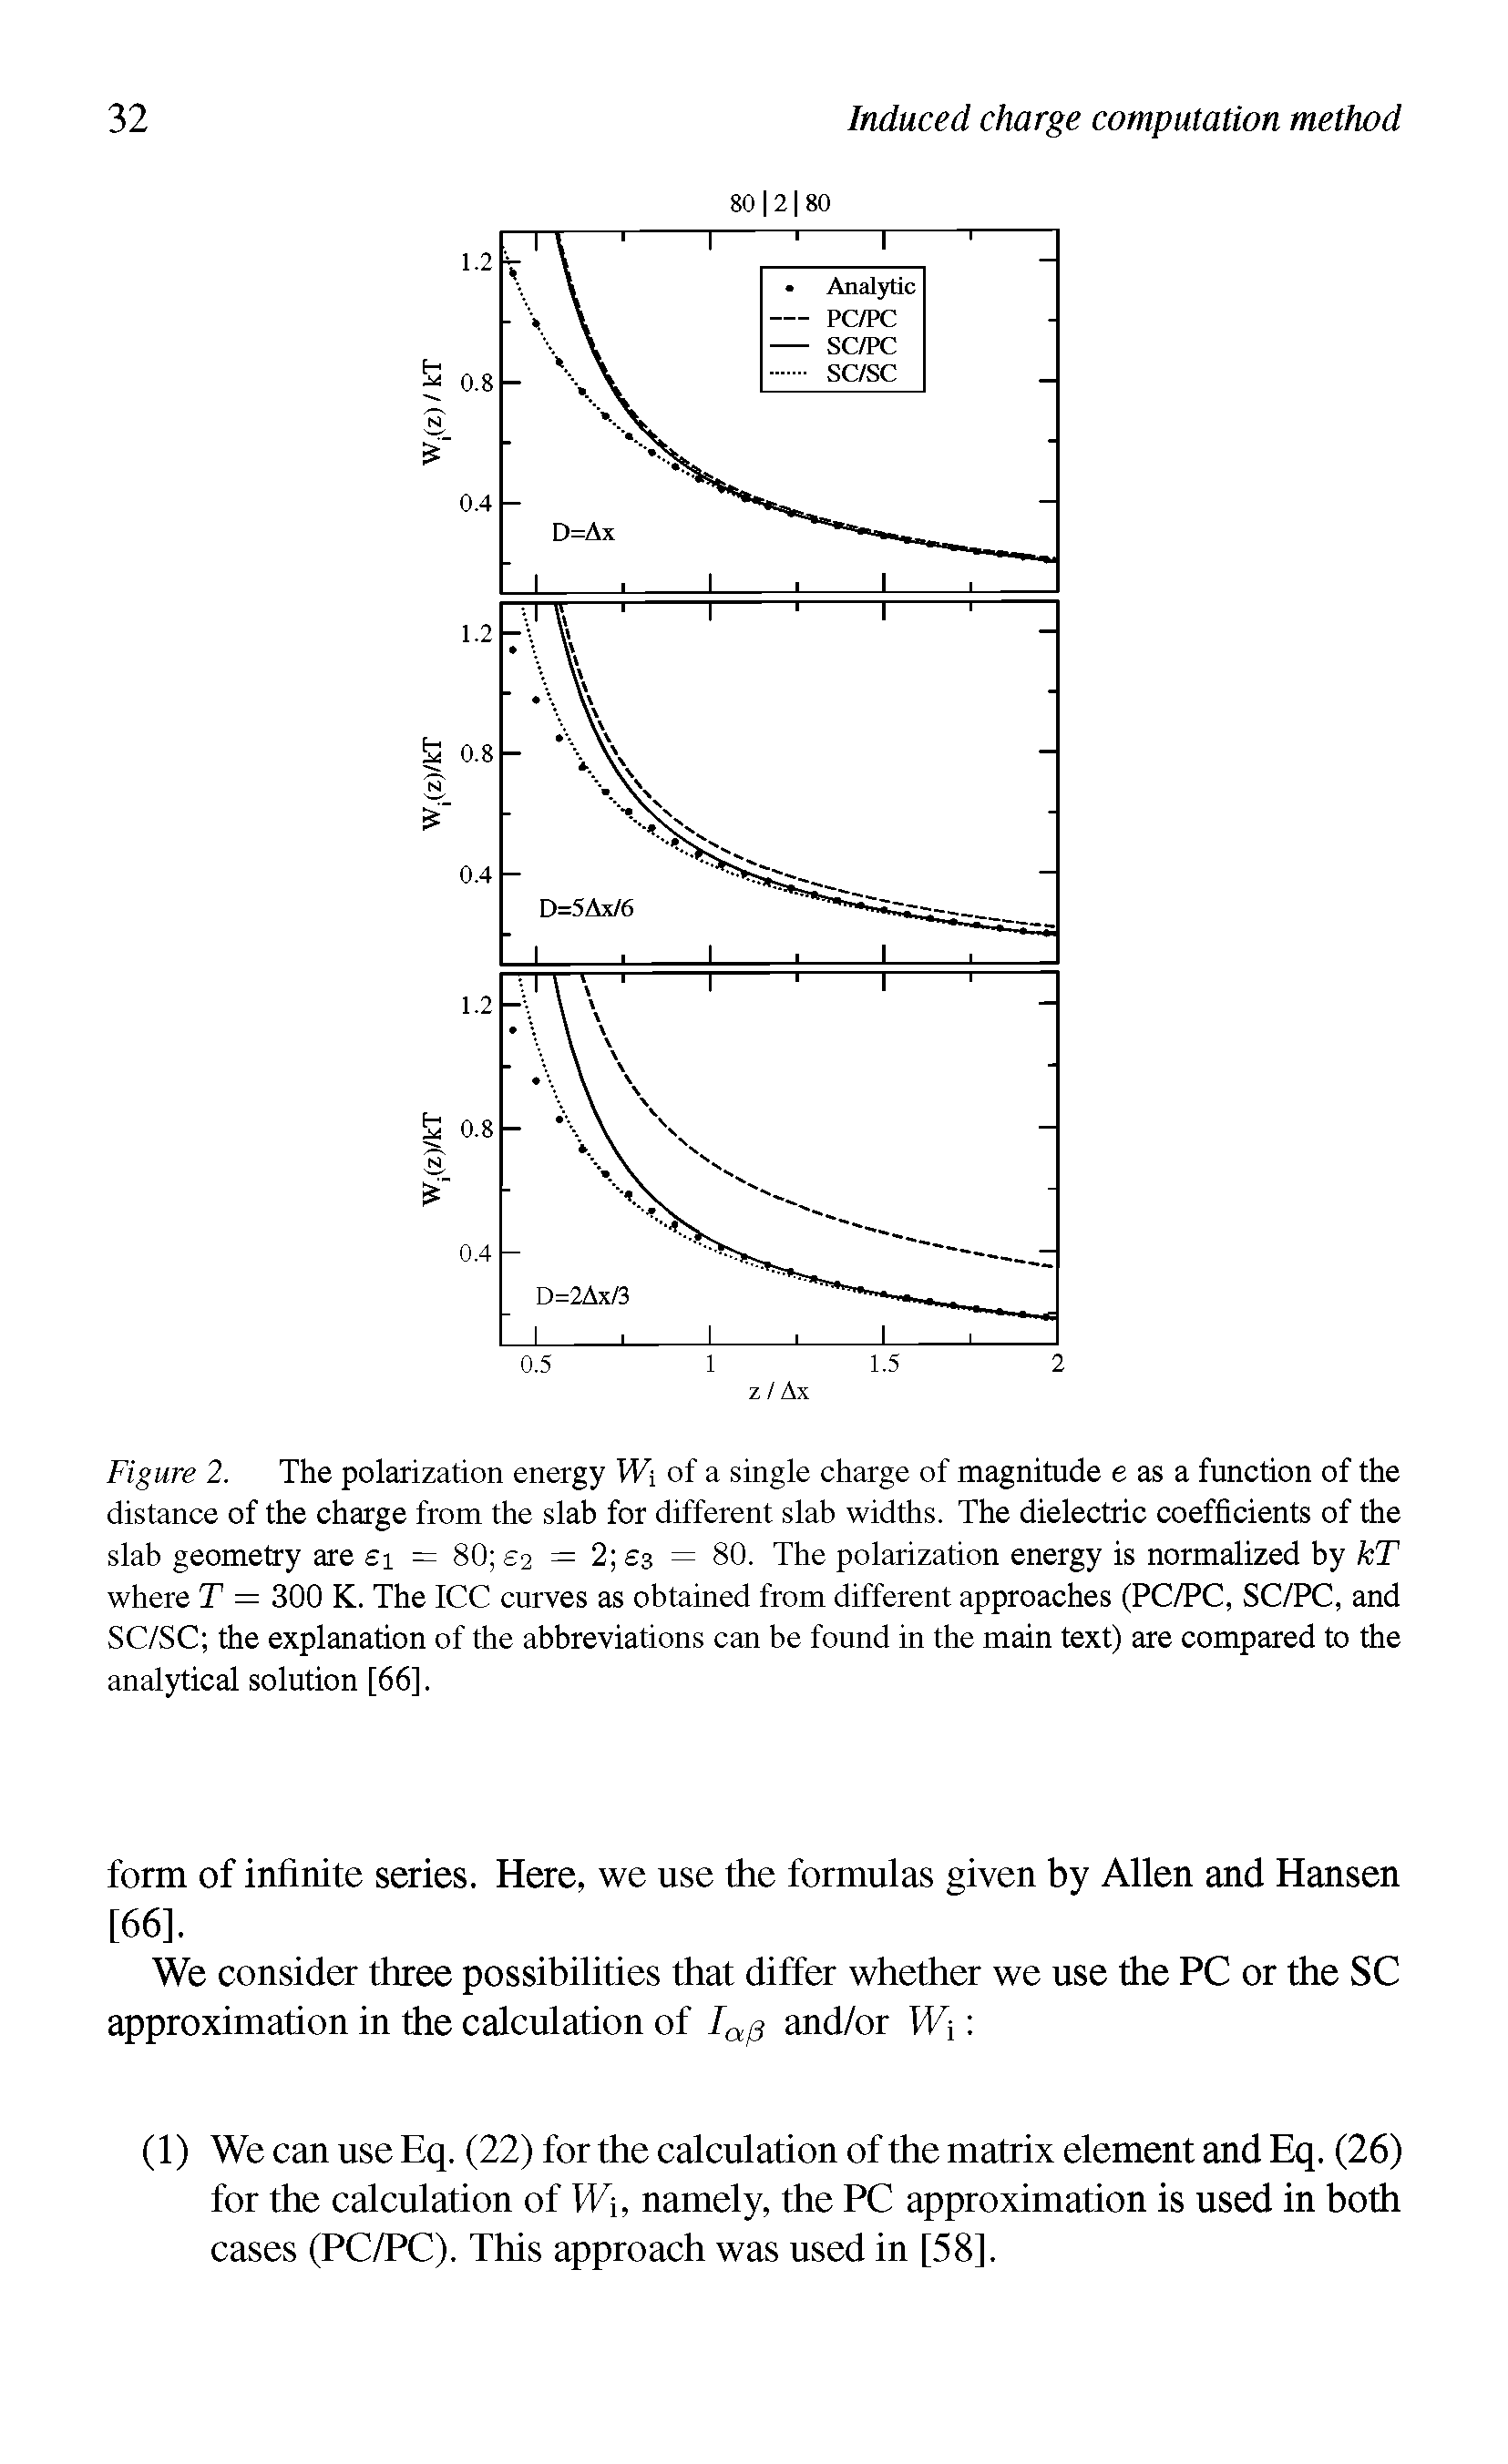 Figure 2. The polarization energy Wi of a single charge of magnitude e as a function of the distance of the charge from the slab for different slab widths. The dielectric coefficients of the slab geometry are ei = 80 2 = 2 3 = 80. The polarization energy is normalized by kT where T = 300 K. The ICC curves as obtained from different approaches (PC/PC, SC/PC, and SC/SC the explanation of the abbreviations can be found in the main text) are compared to the analytical solution [66],...